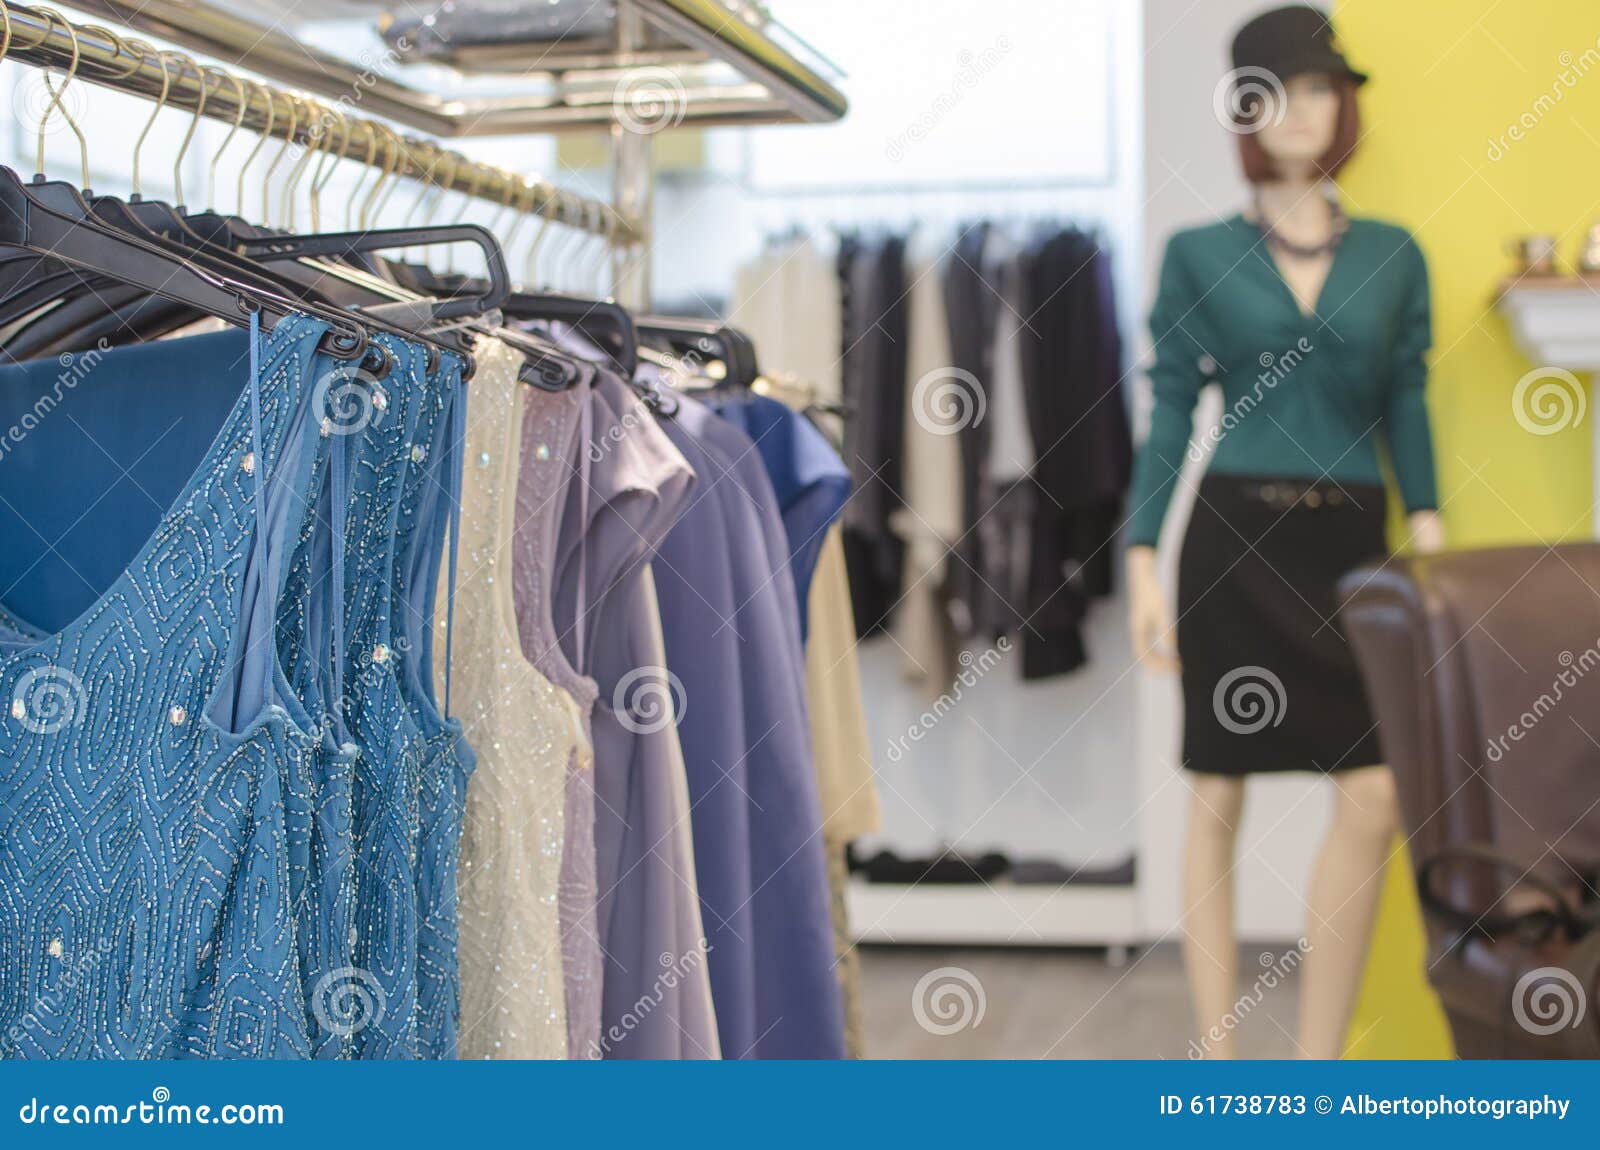 Women clothing store stock image. Image of clothes, commercial - 61738783